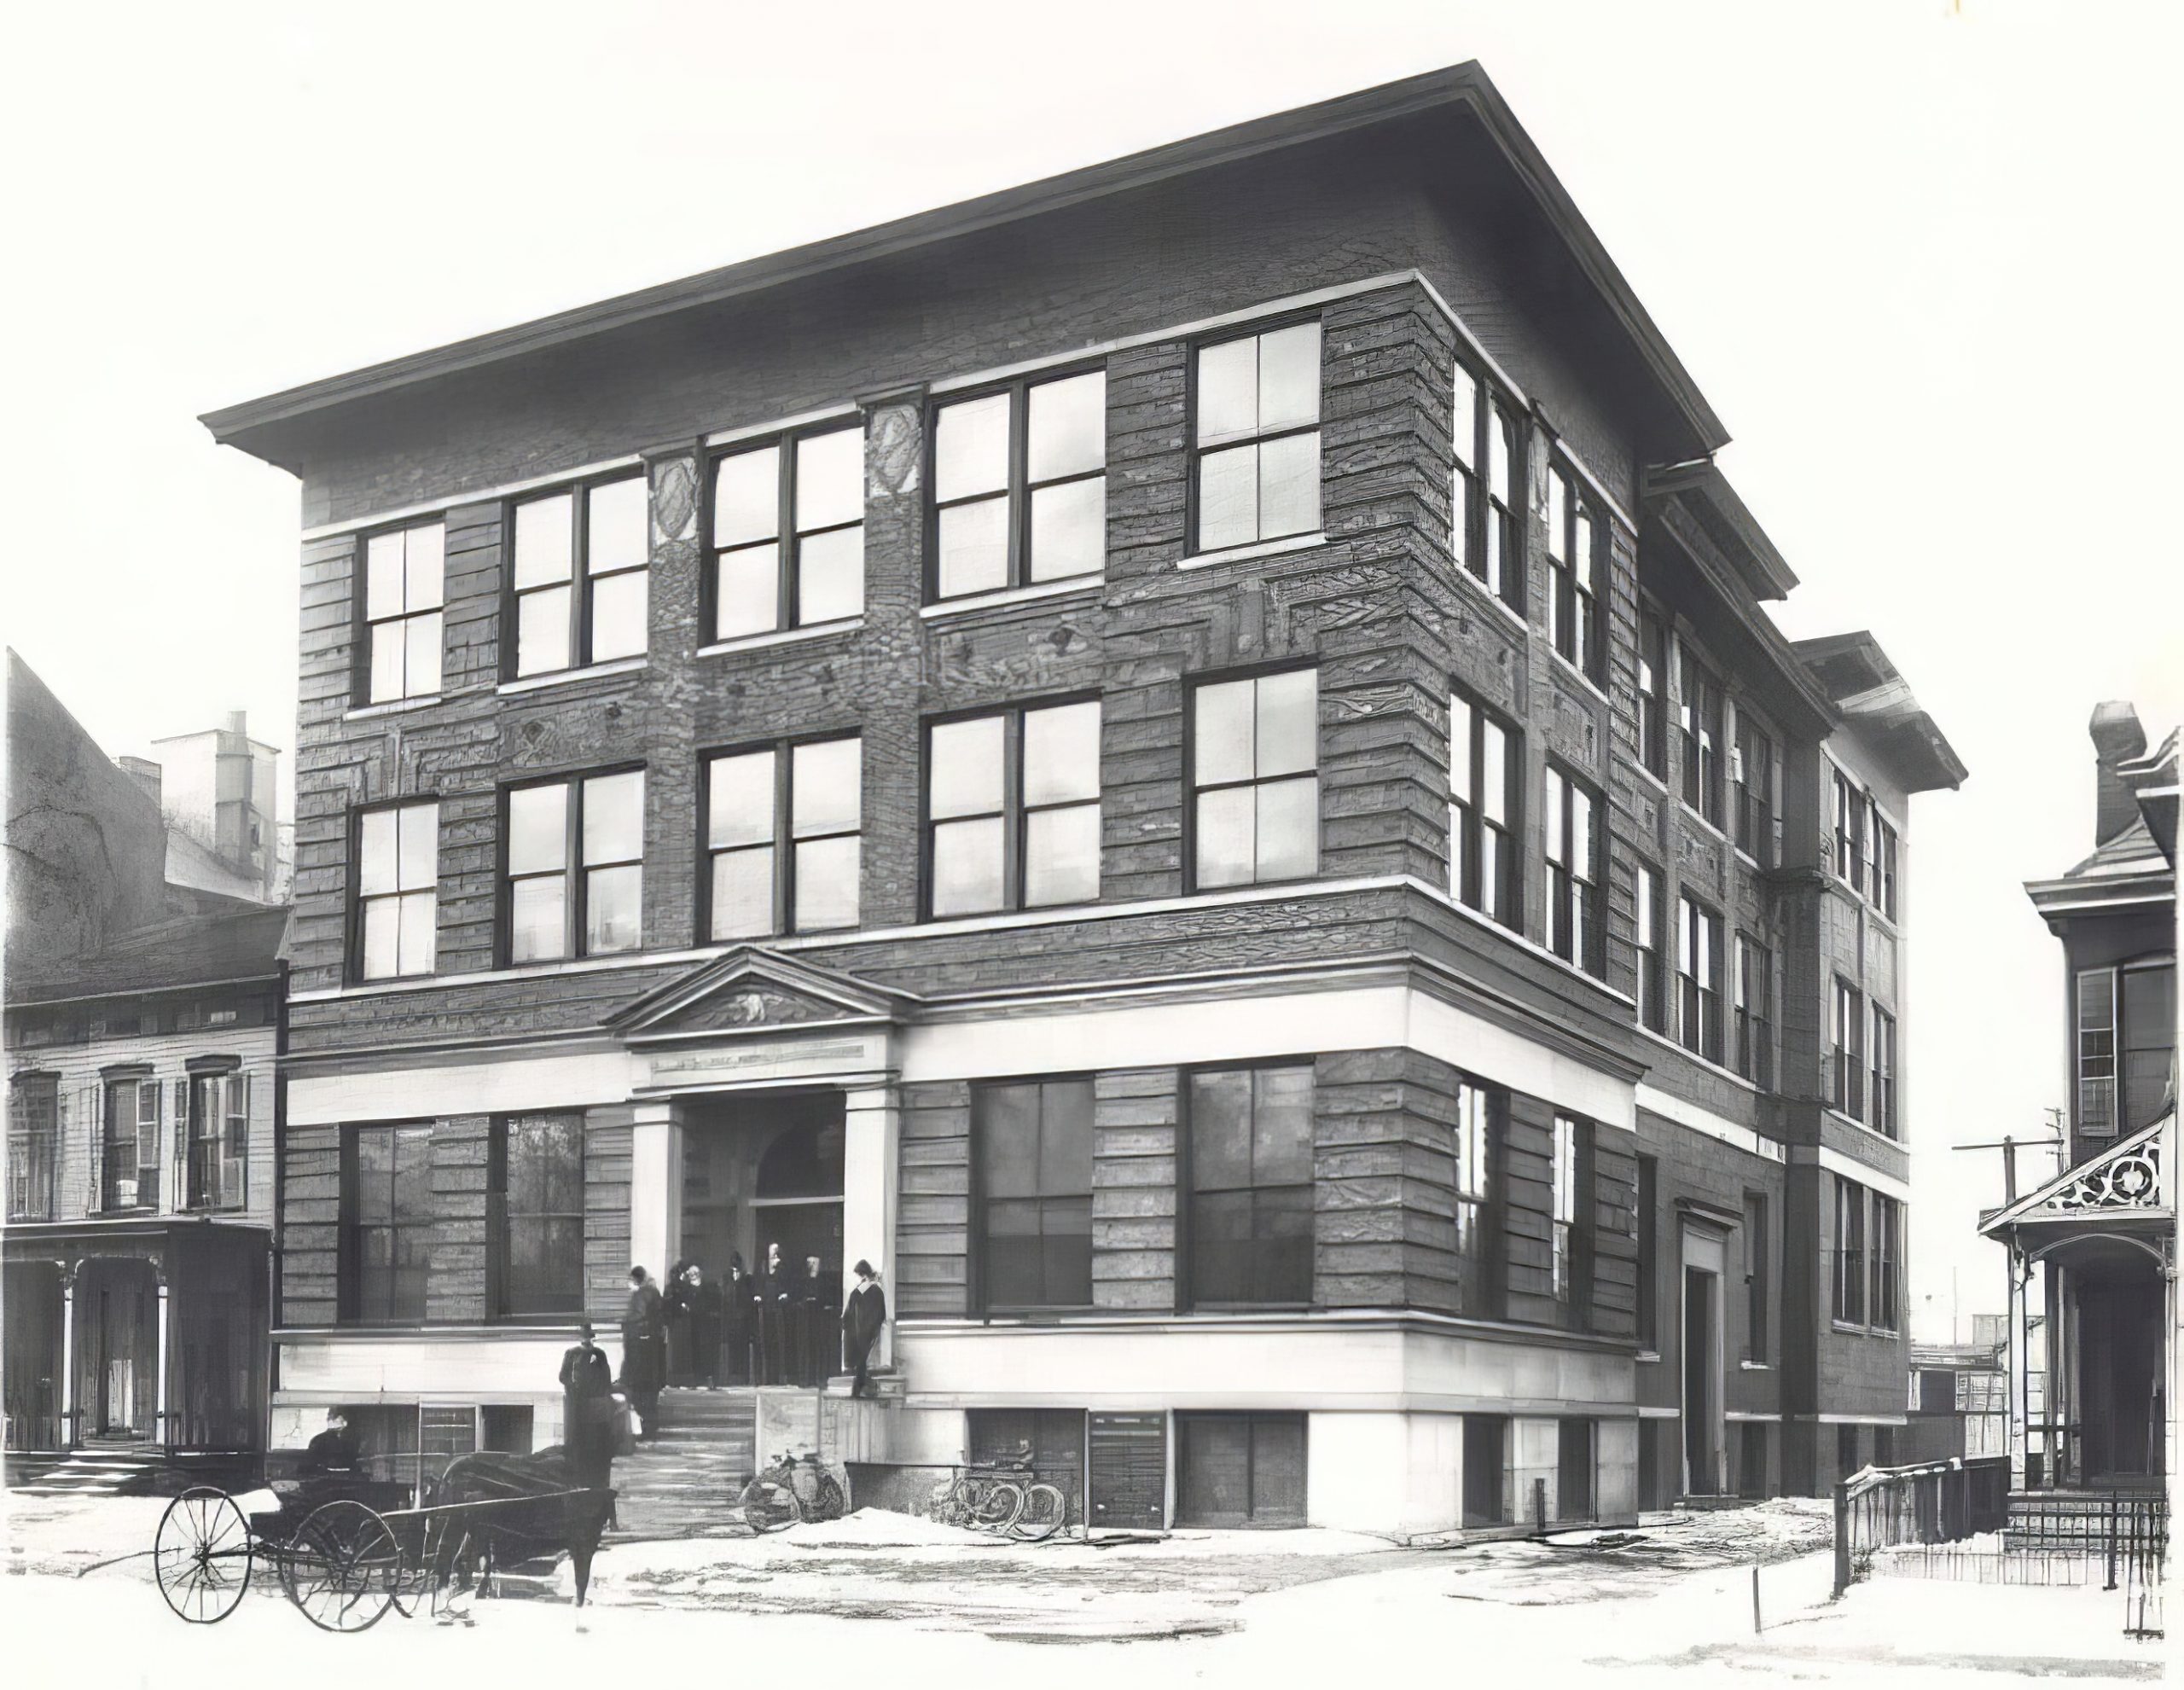 A group of men stand outside a multi-story brick building. 